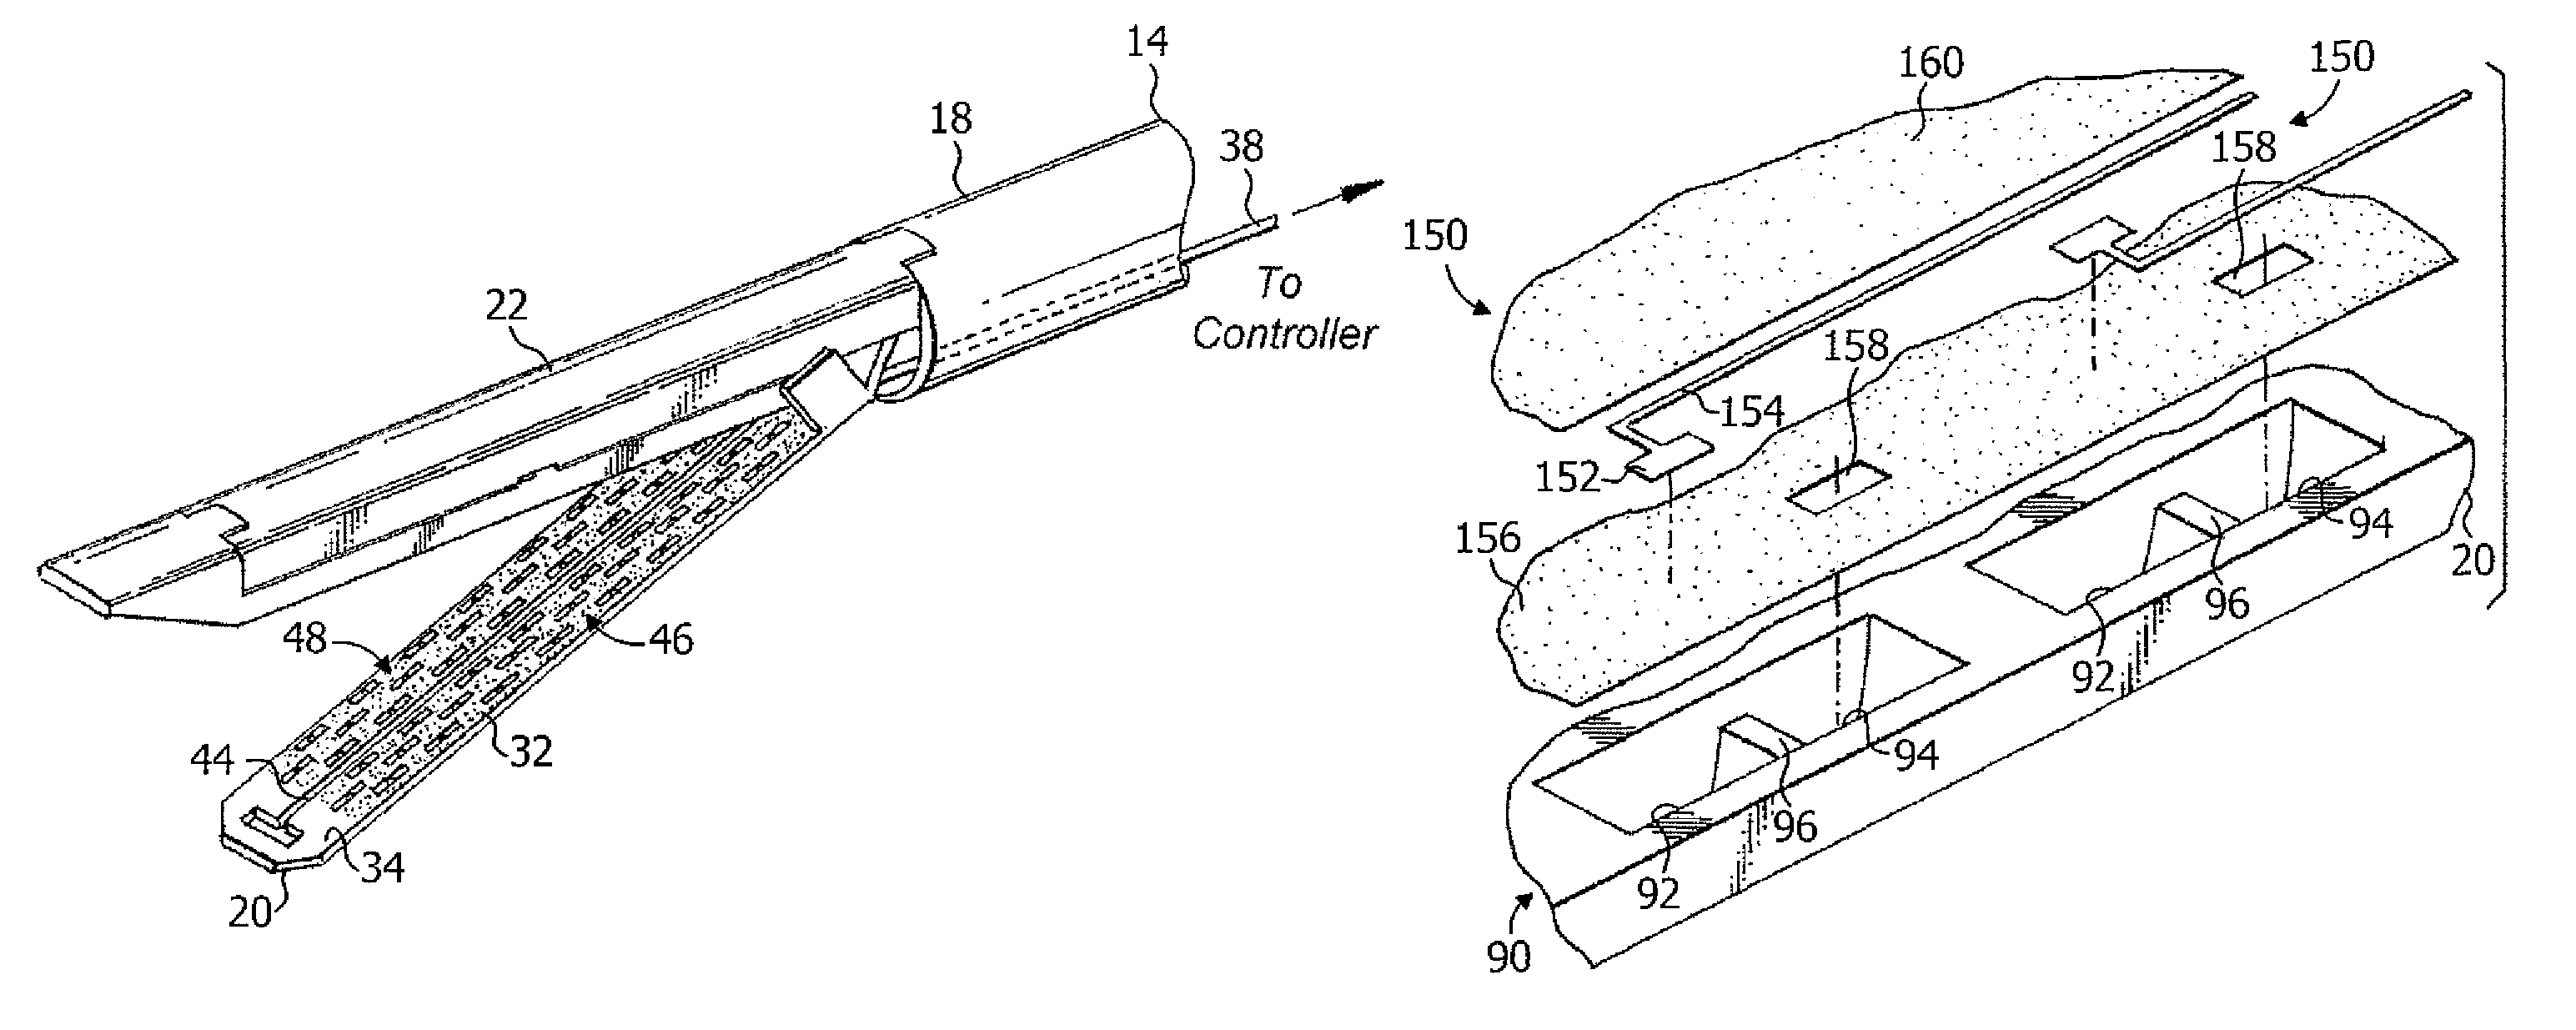 Staple formation recognition for a surgical device